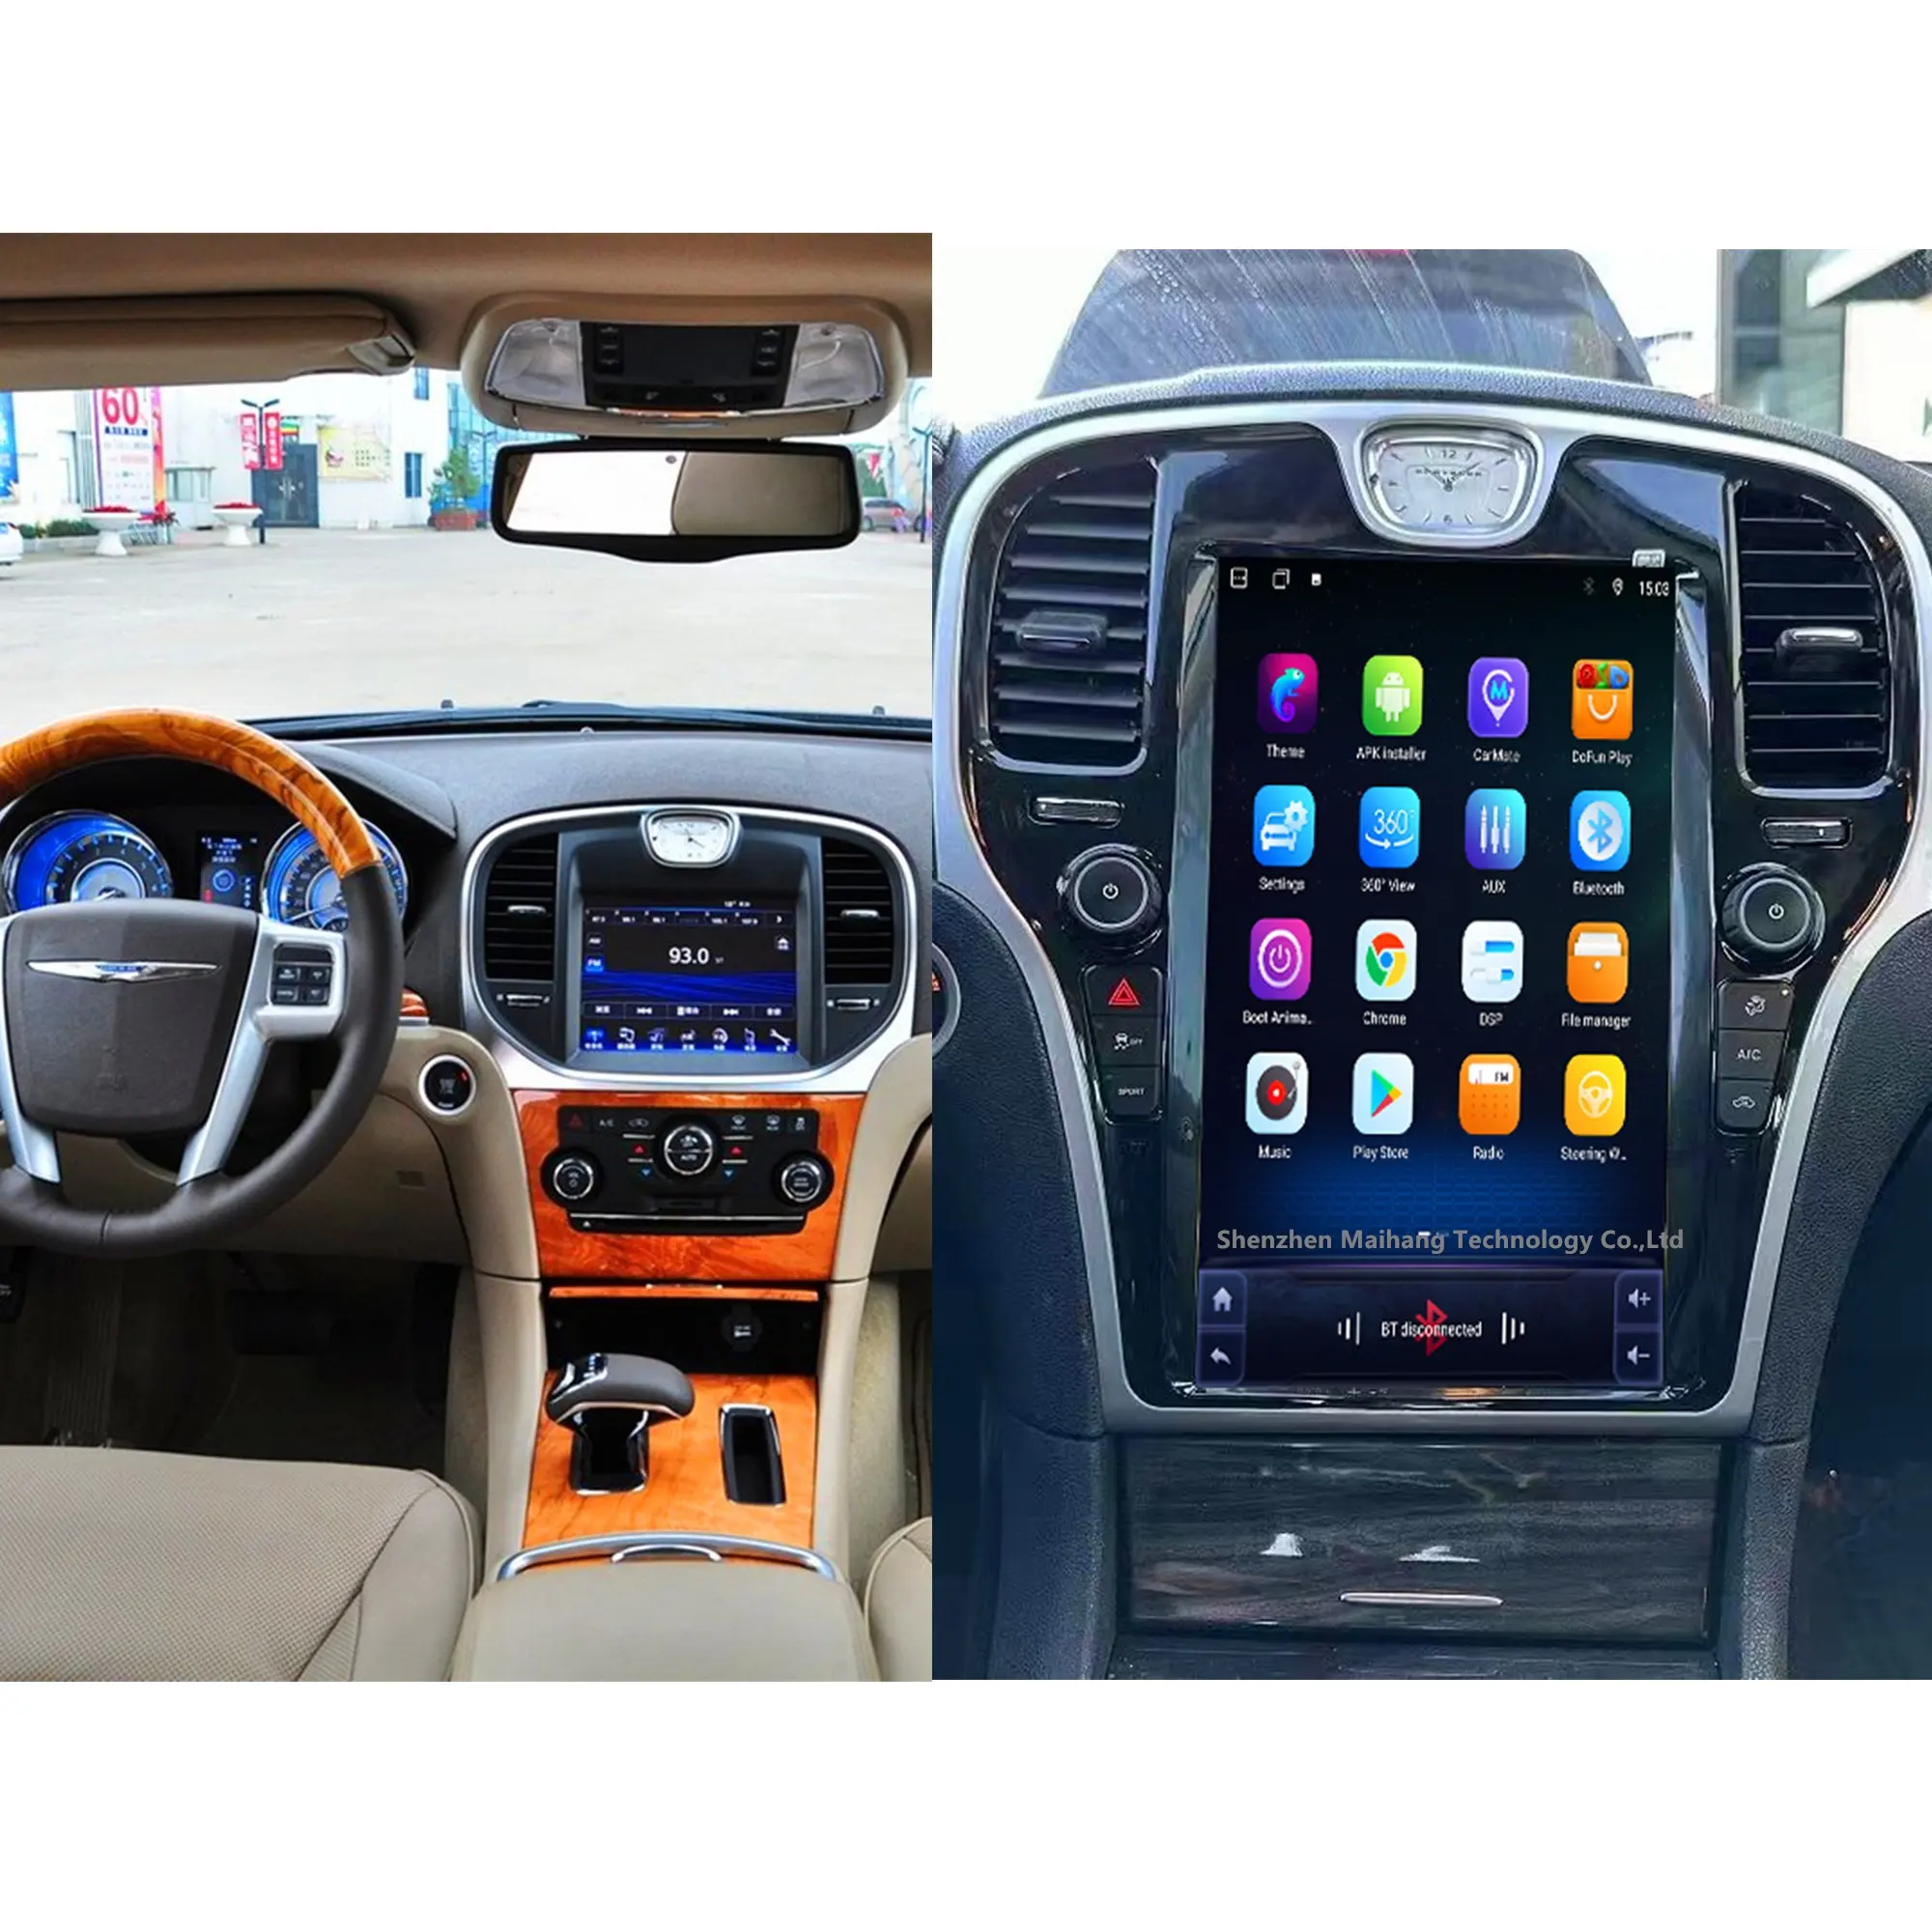 Car player for Chrysler 2013-19 300C Car android stereo radio Car audio Gps Navigation factory